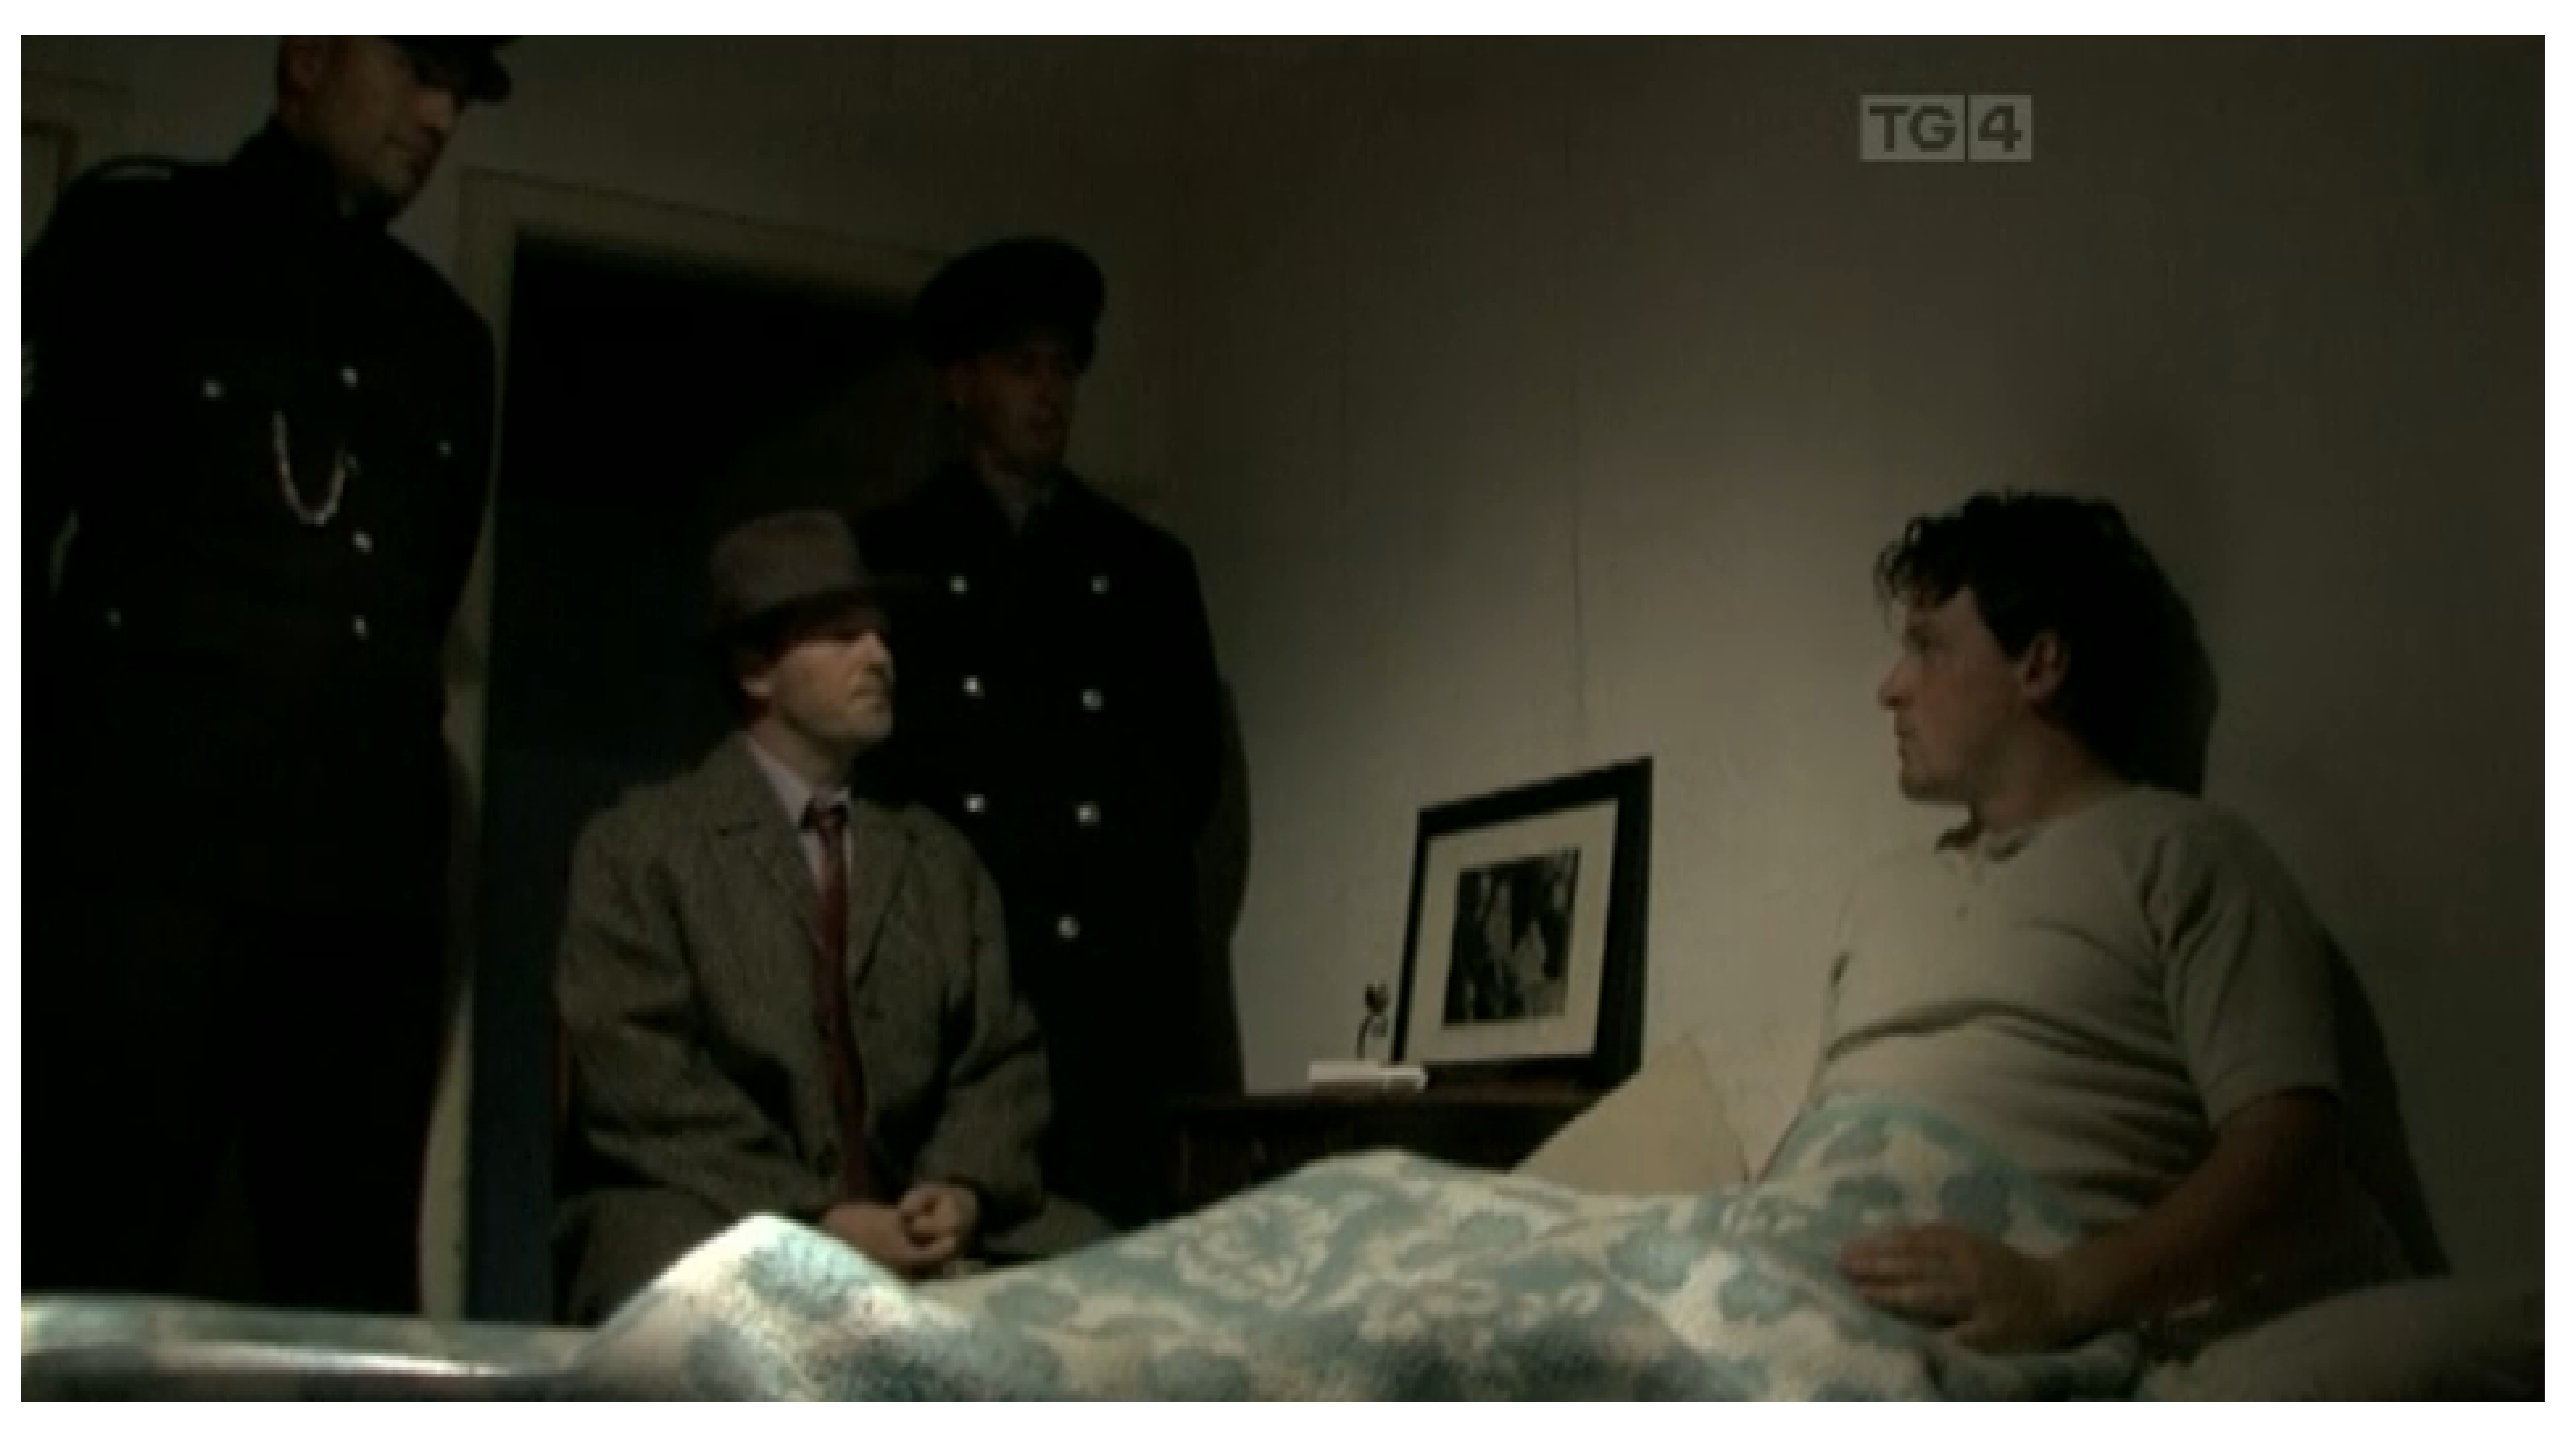 Declan Reynolds as Michael Manning in Ceart Agus Coir (Crime & Punishment) for TG4